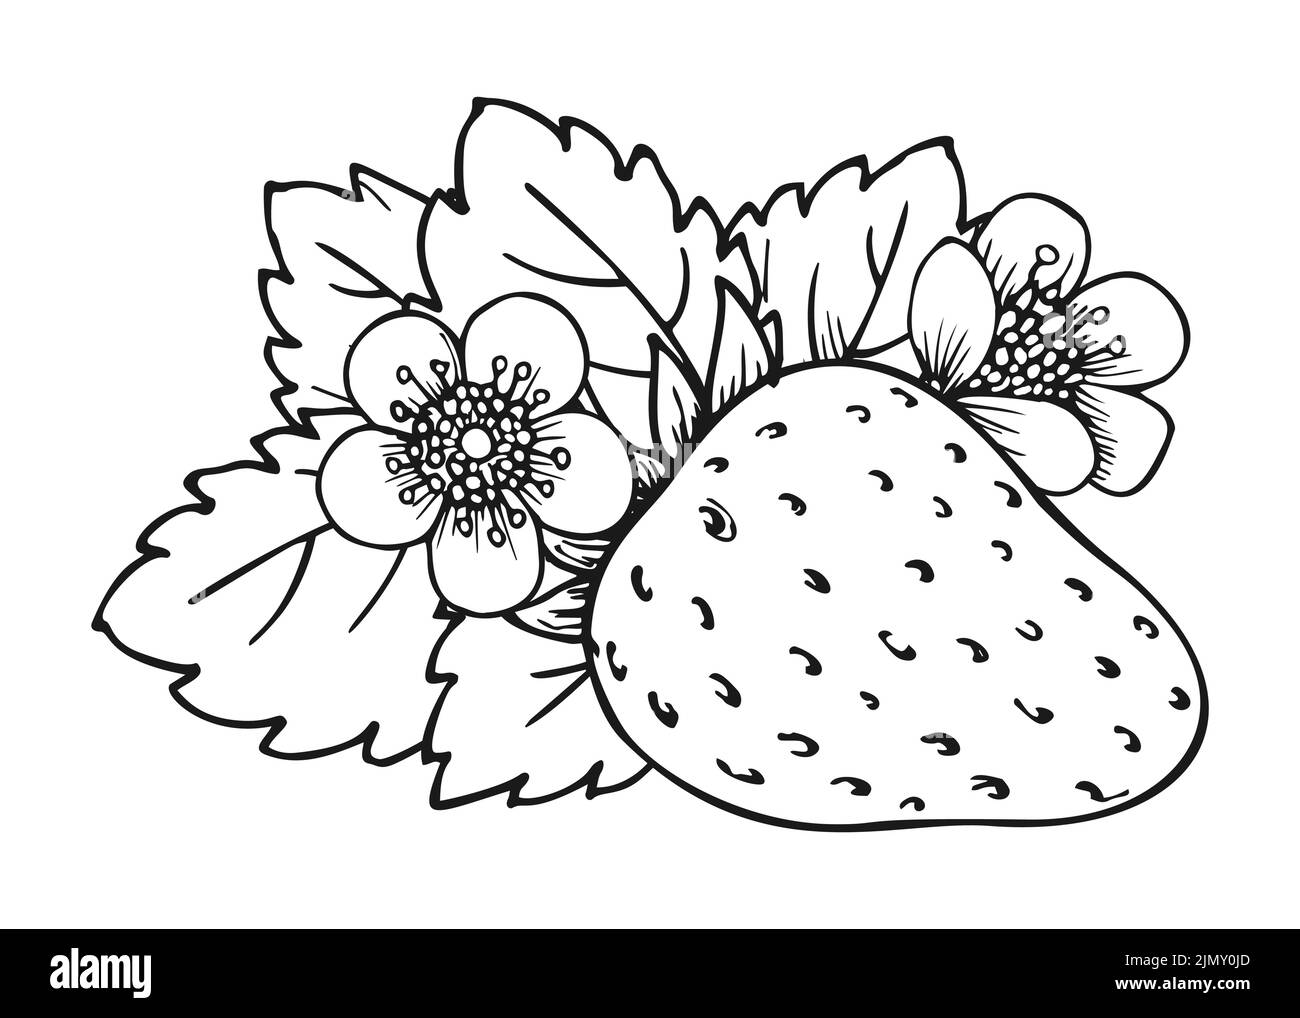 Sweet strawberry hand drawn sketch. Forest berries branch. Coloring book line art of healthy fresh farm organic berry harvest. Blossom bush with juicy strawberries, flowers and leaves closeup Stock Vector